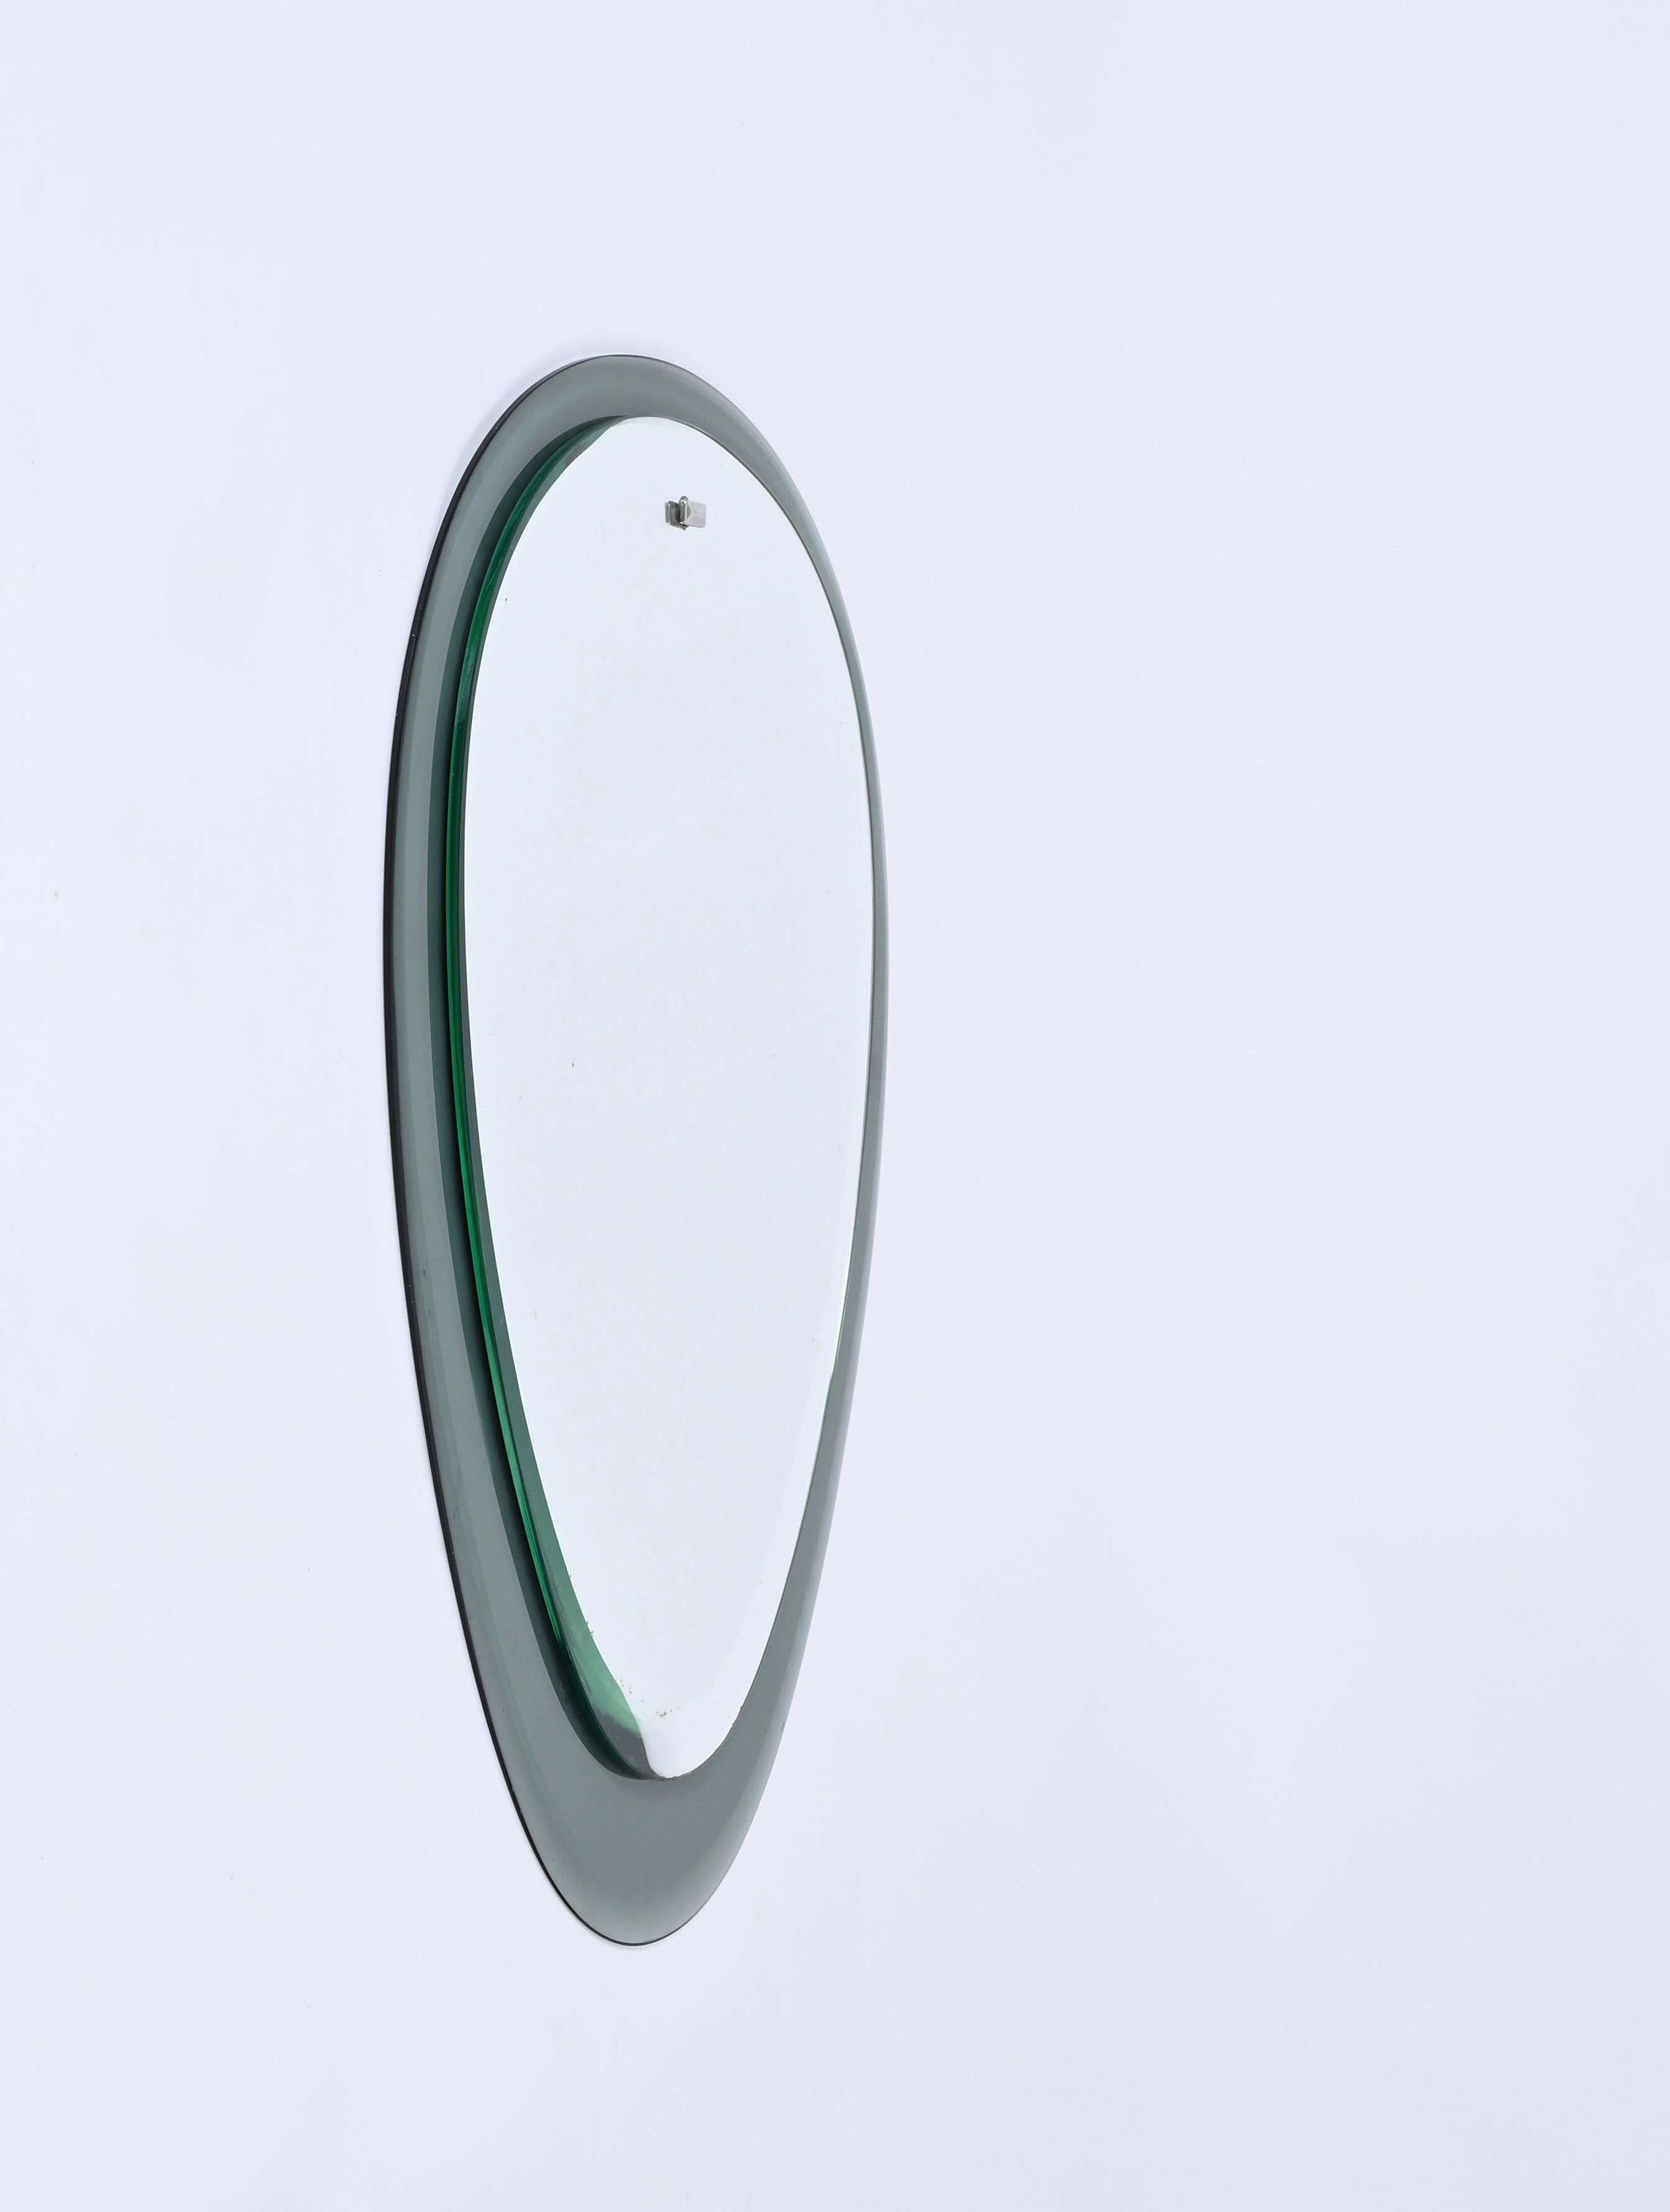 Mid-20th Century Cristal Art Green Aquamarine Beveled Oval Wall Mirror, Italy, 1950s For Sale